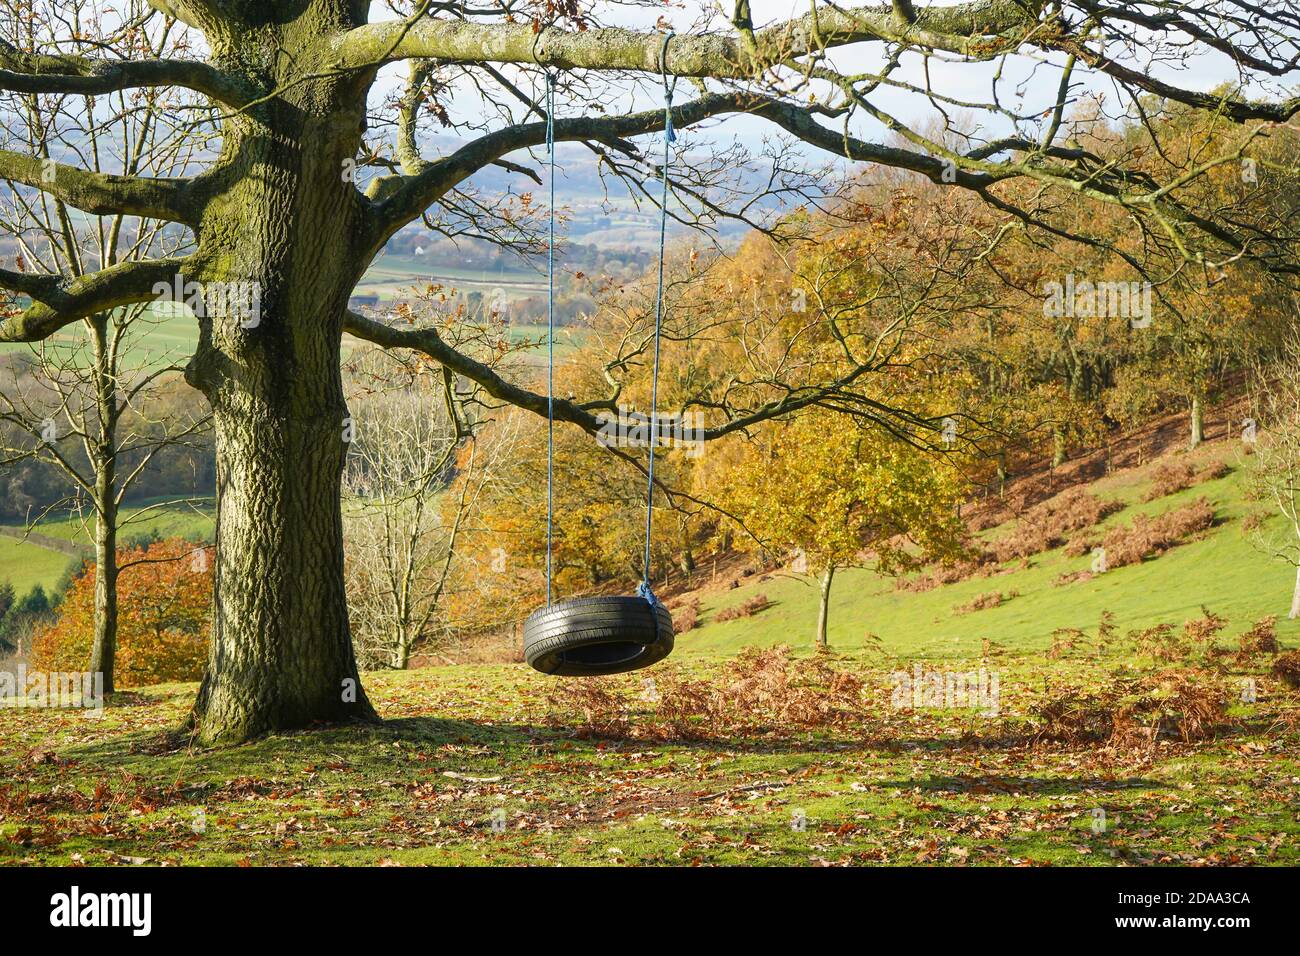 Rubber tyre tire rope swing hanging from tree in autumn landscape scene on a sunny day. Memories of childhood. Stock Photo